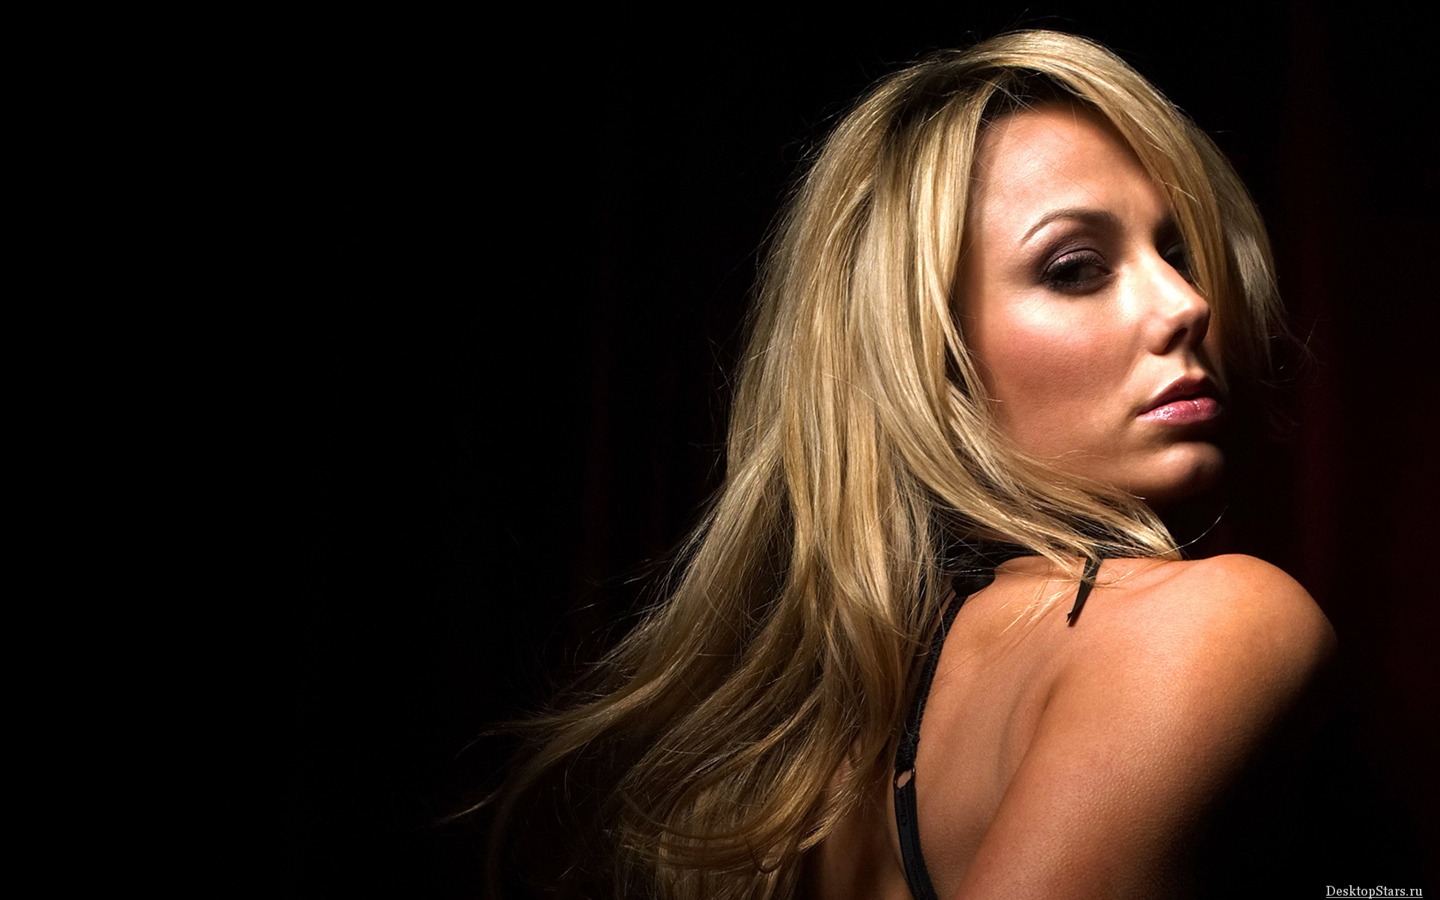 Stacy Keibler #003 - 1440x900 Wallpapers Pictures Photos Images